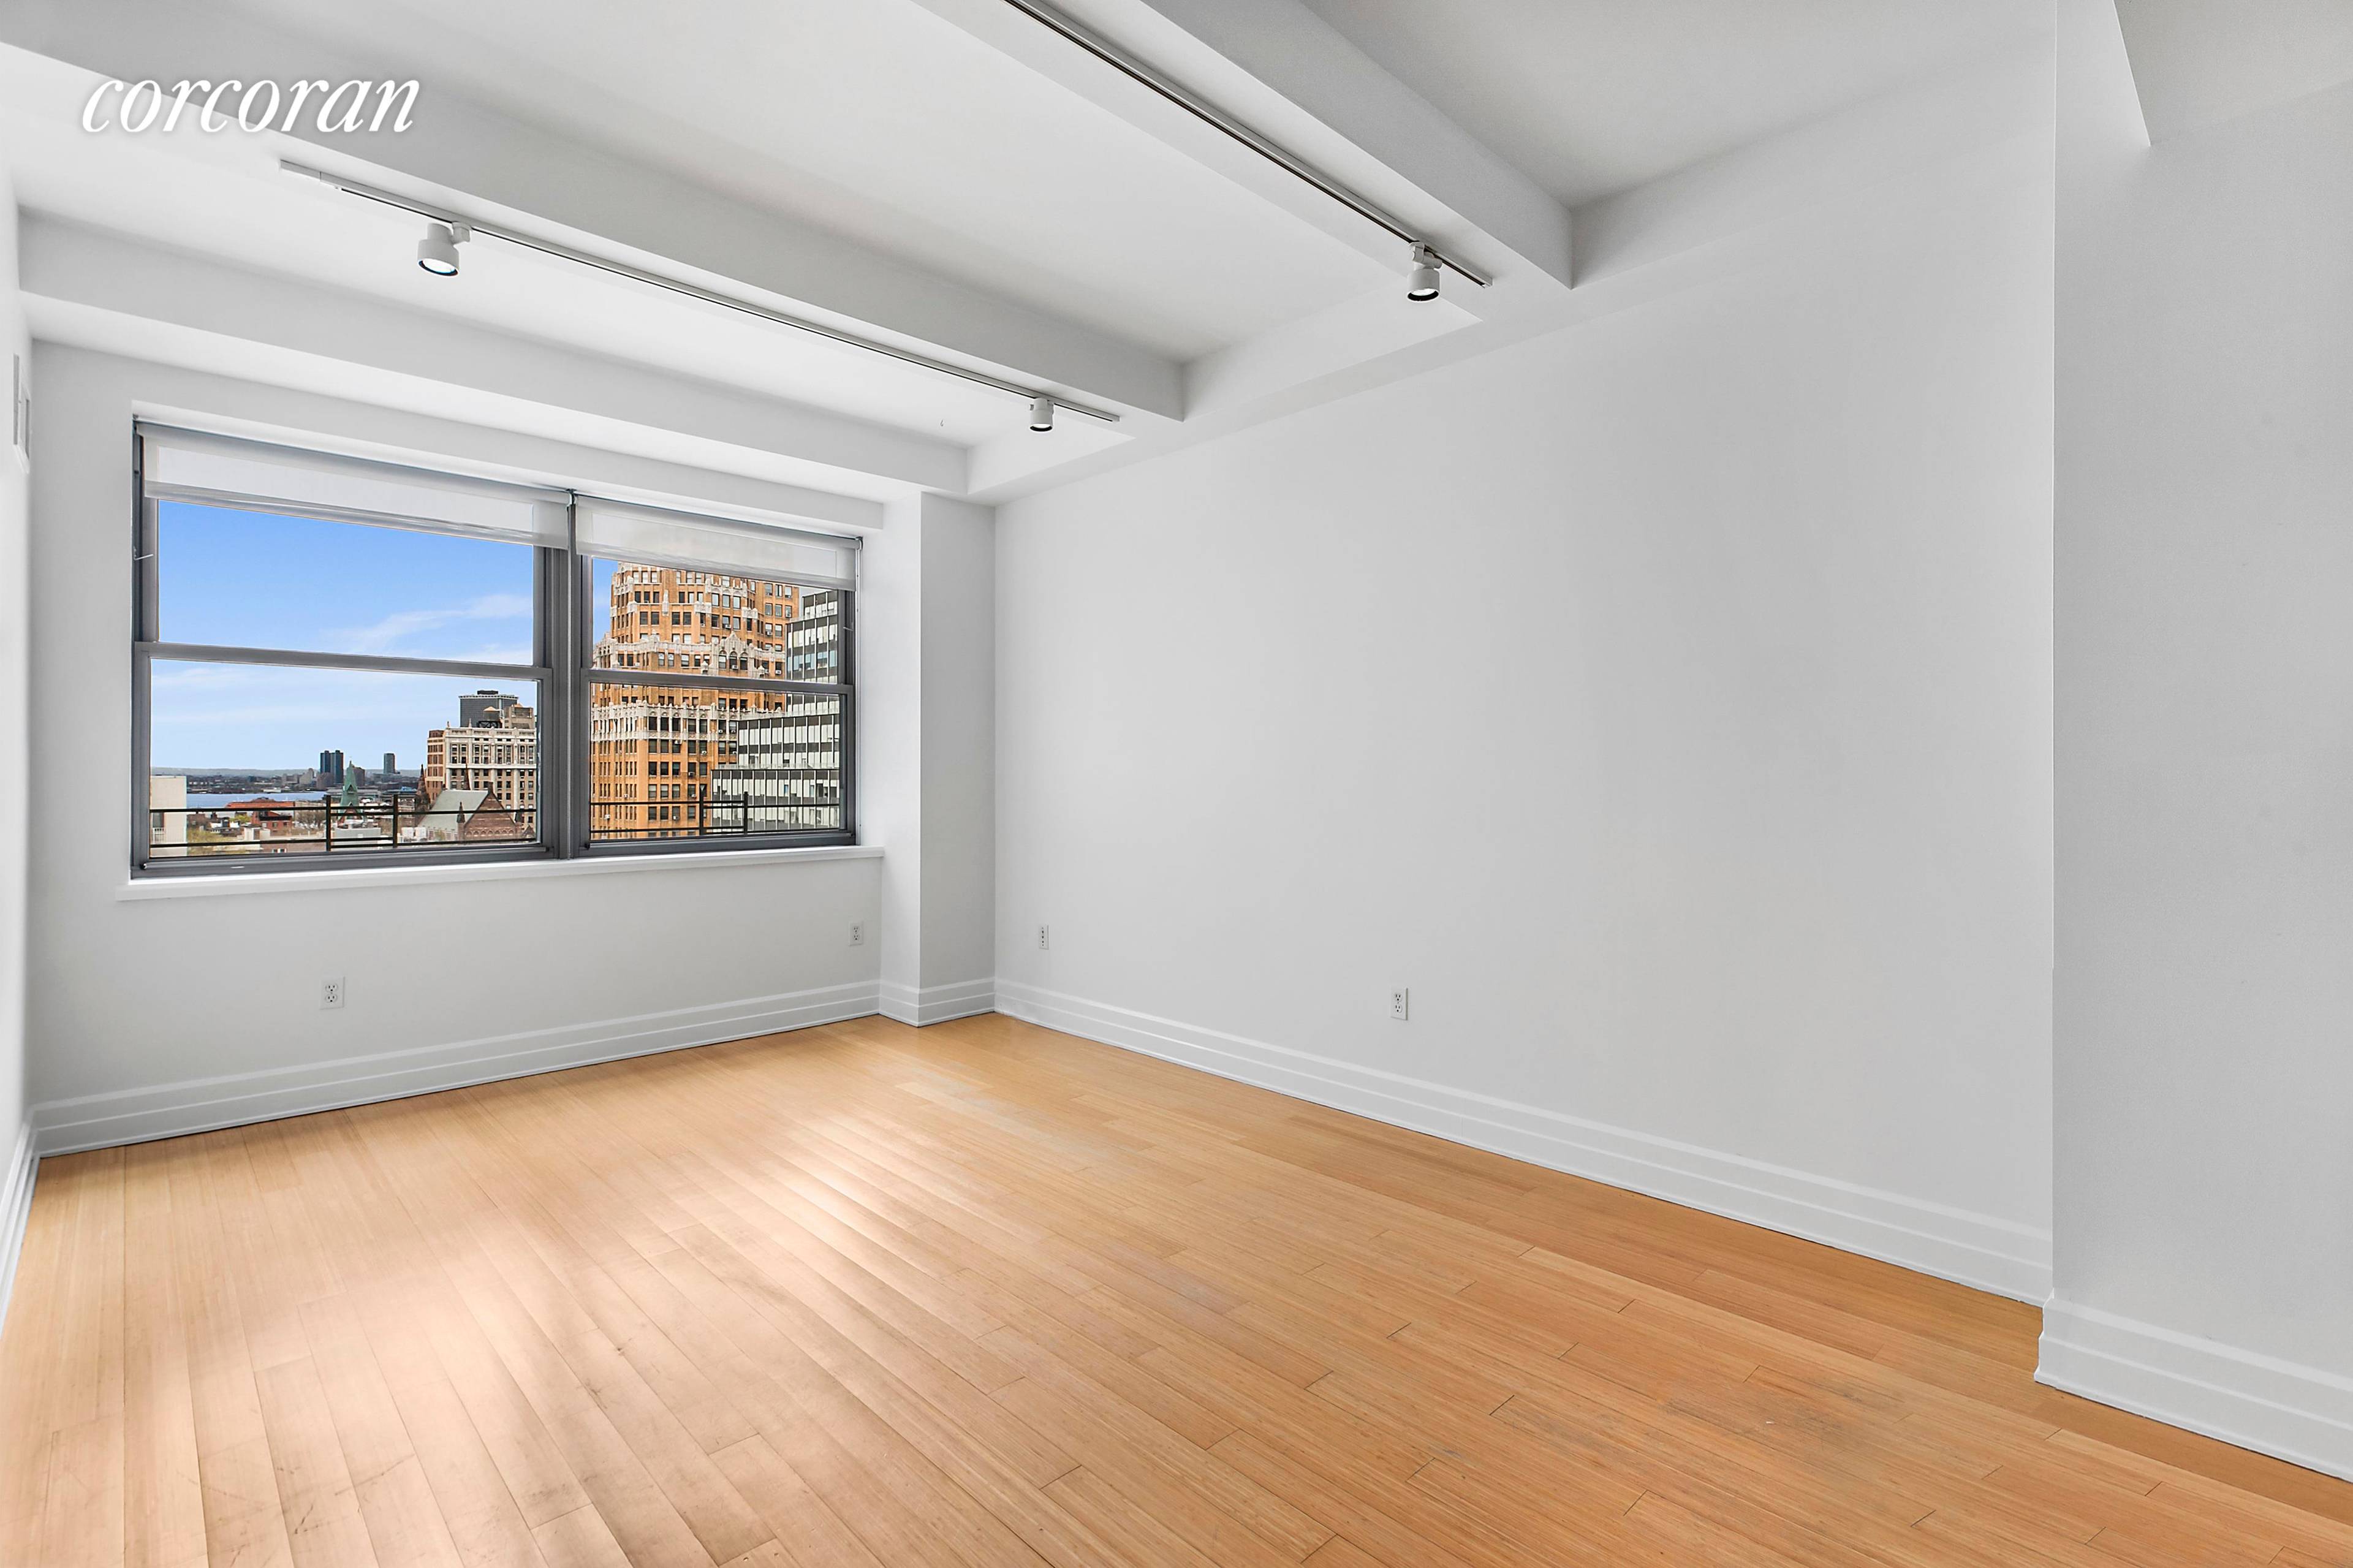 Move right into this spacious west facing studio with home office and enjoy the stunning downtown Brooklyn sunset views in one of Brooklyn's finest addresses.